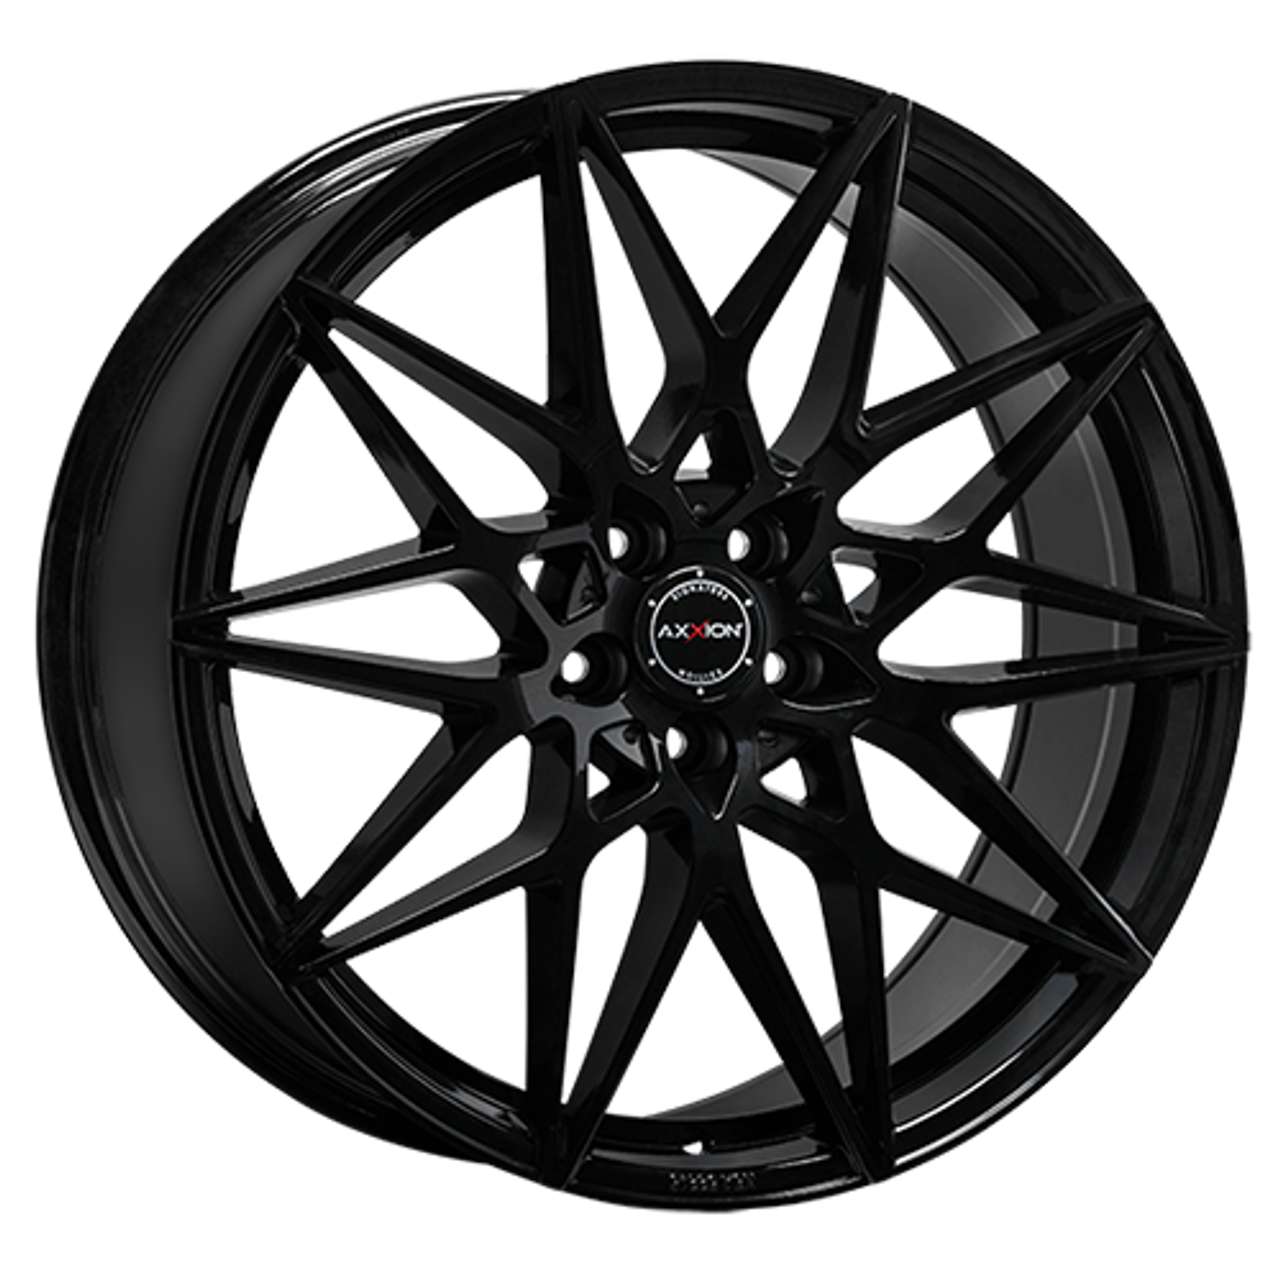 AXXION AX9 black glossy painted 8.5Jx19 5x108 ET45